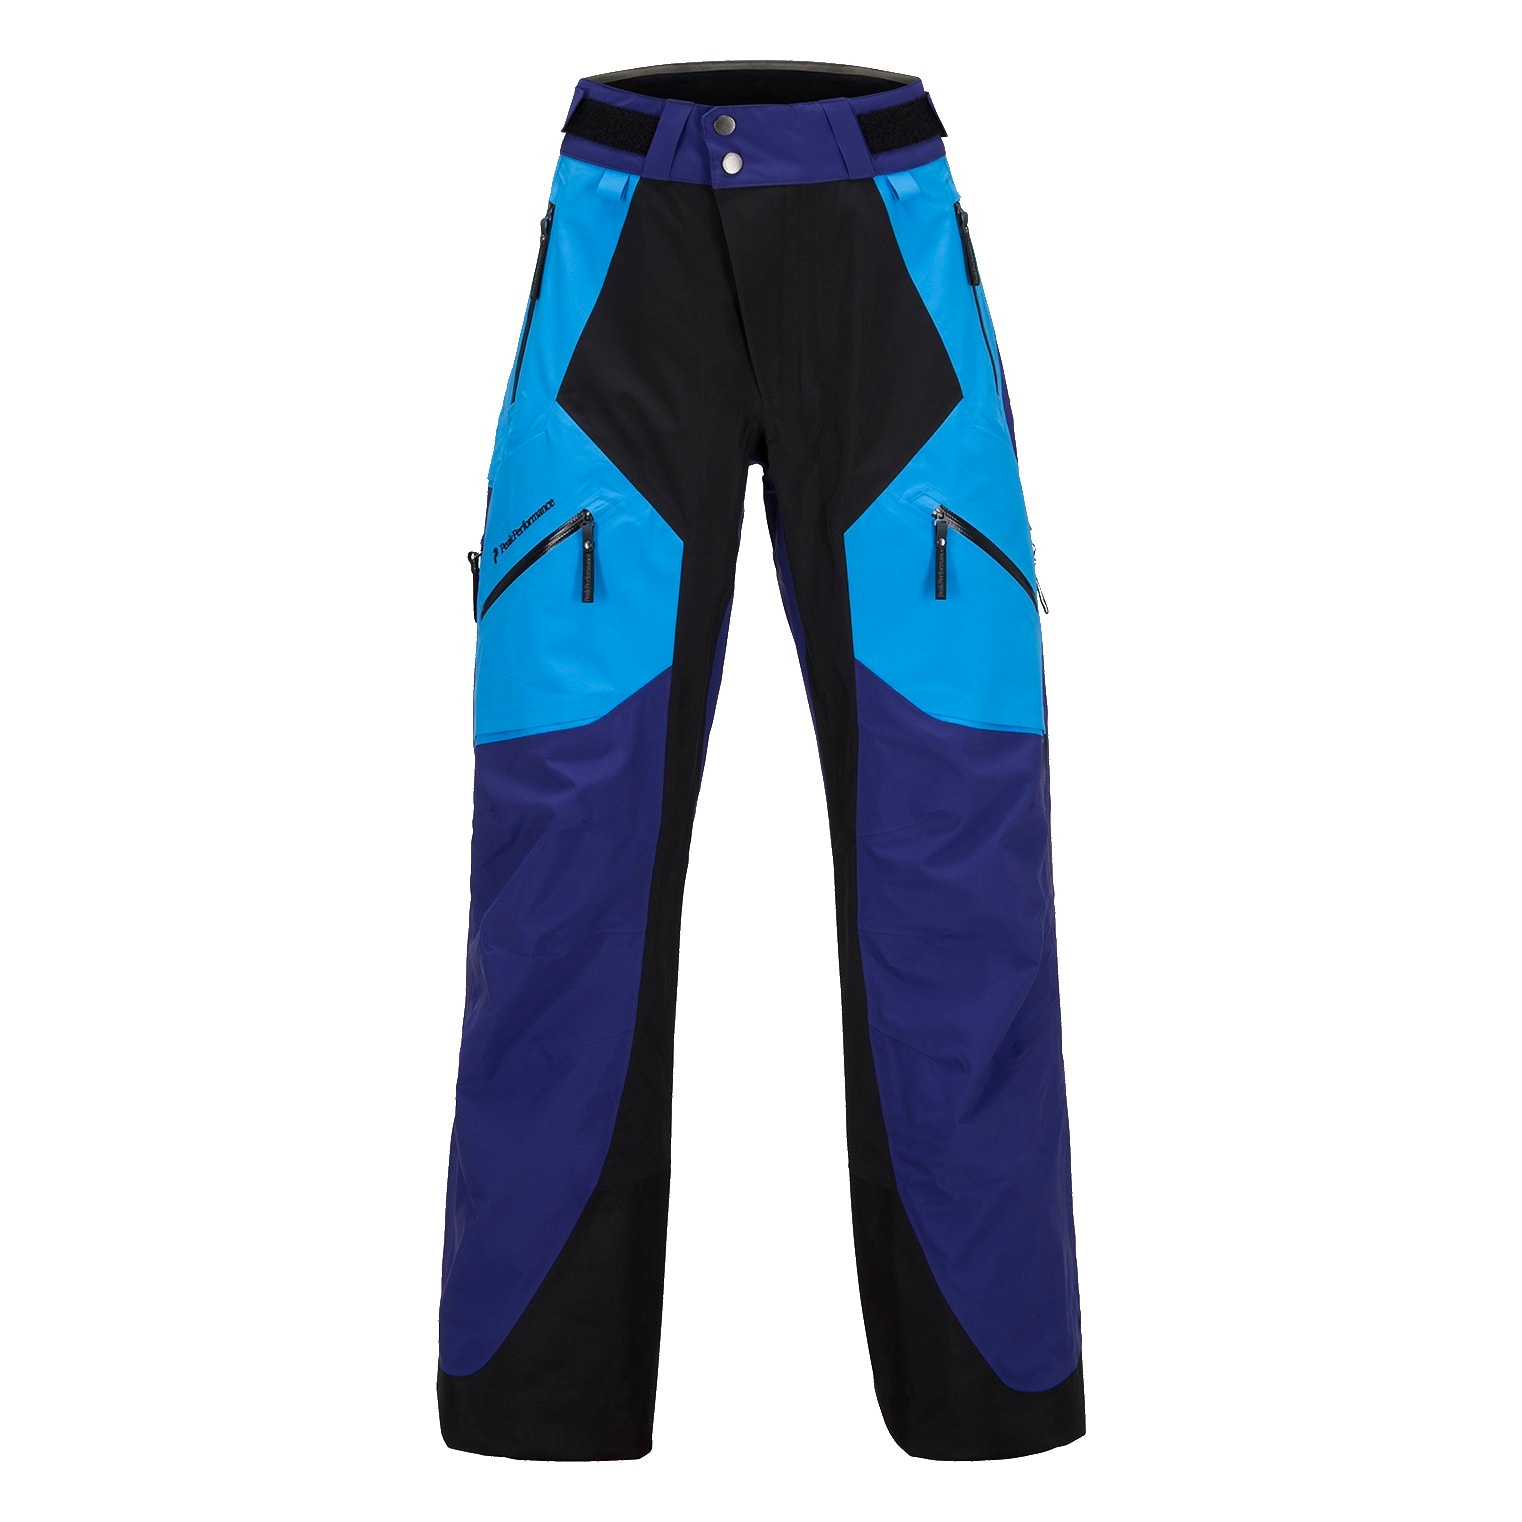 captain tape Thaw, thaw, frost thaw Buy Peak Performance Women's Heli Gravity Pants from Outnorth